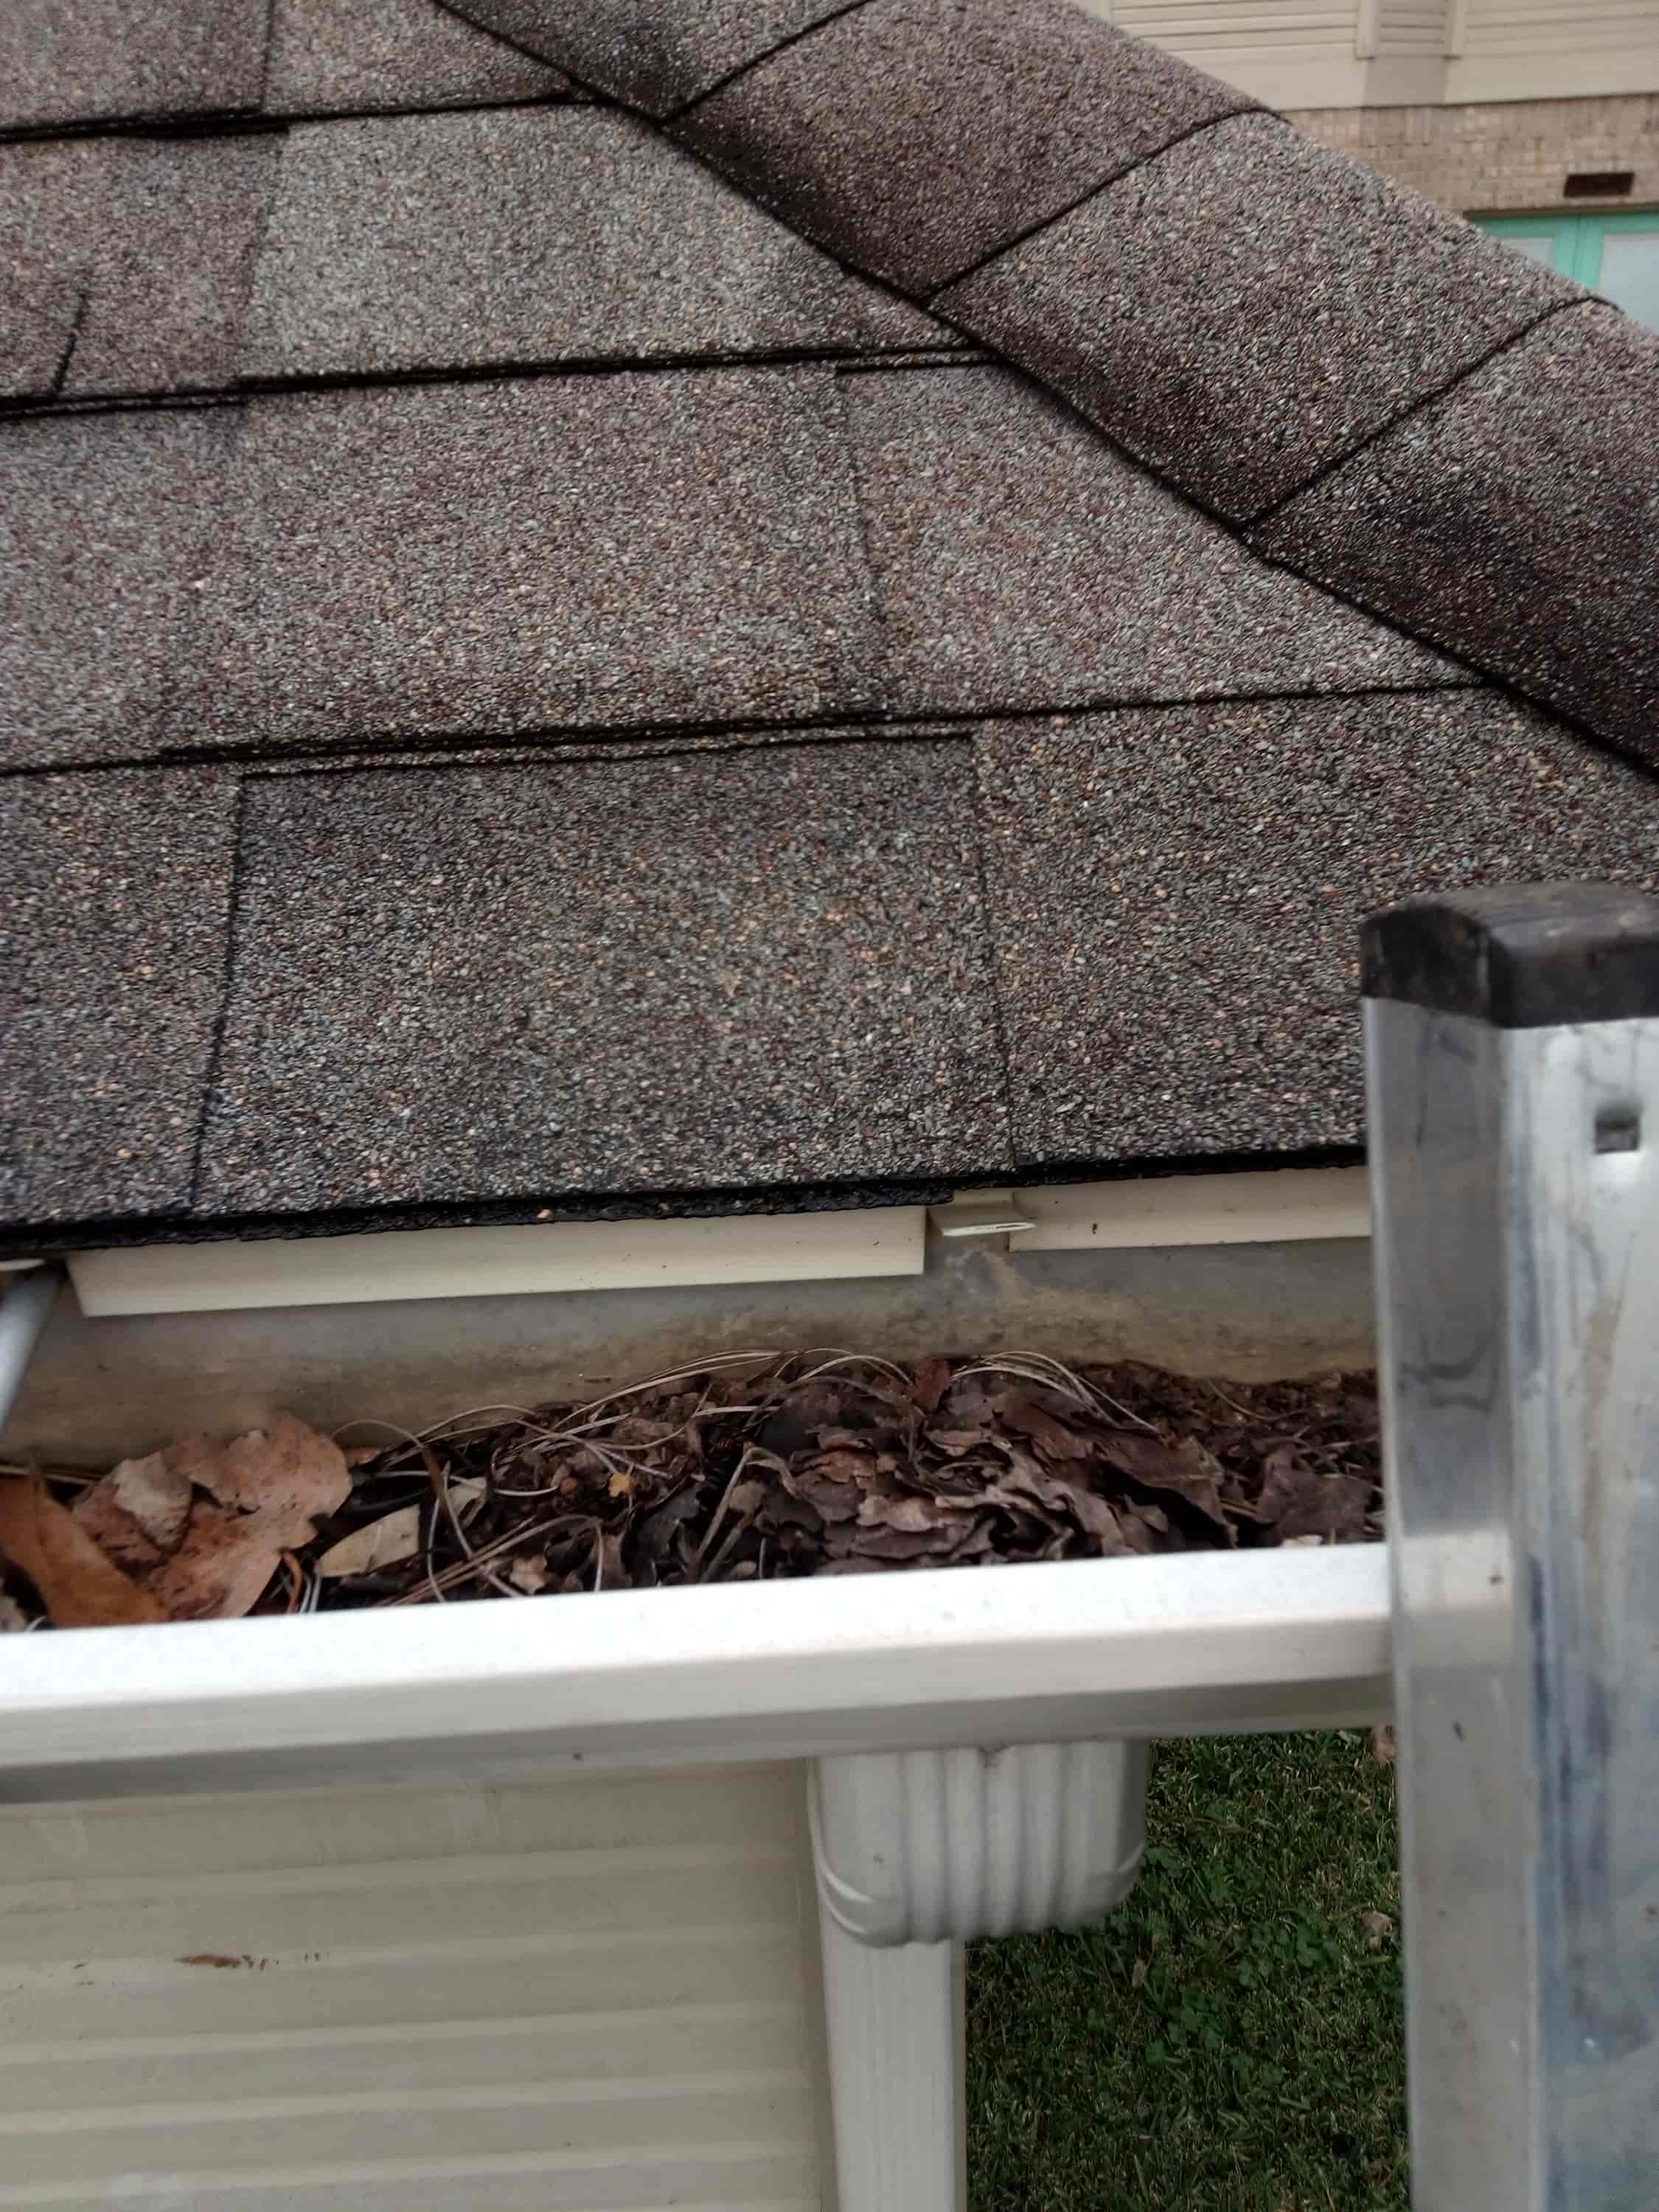 how do you clean your gutters